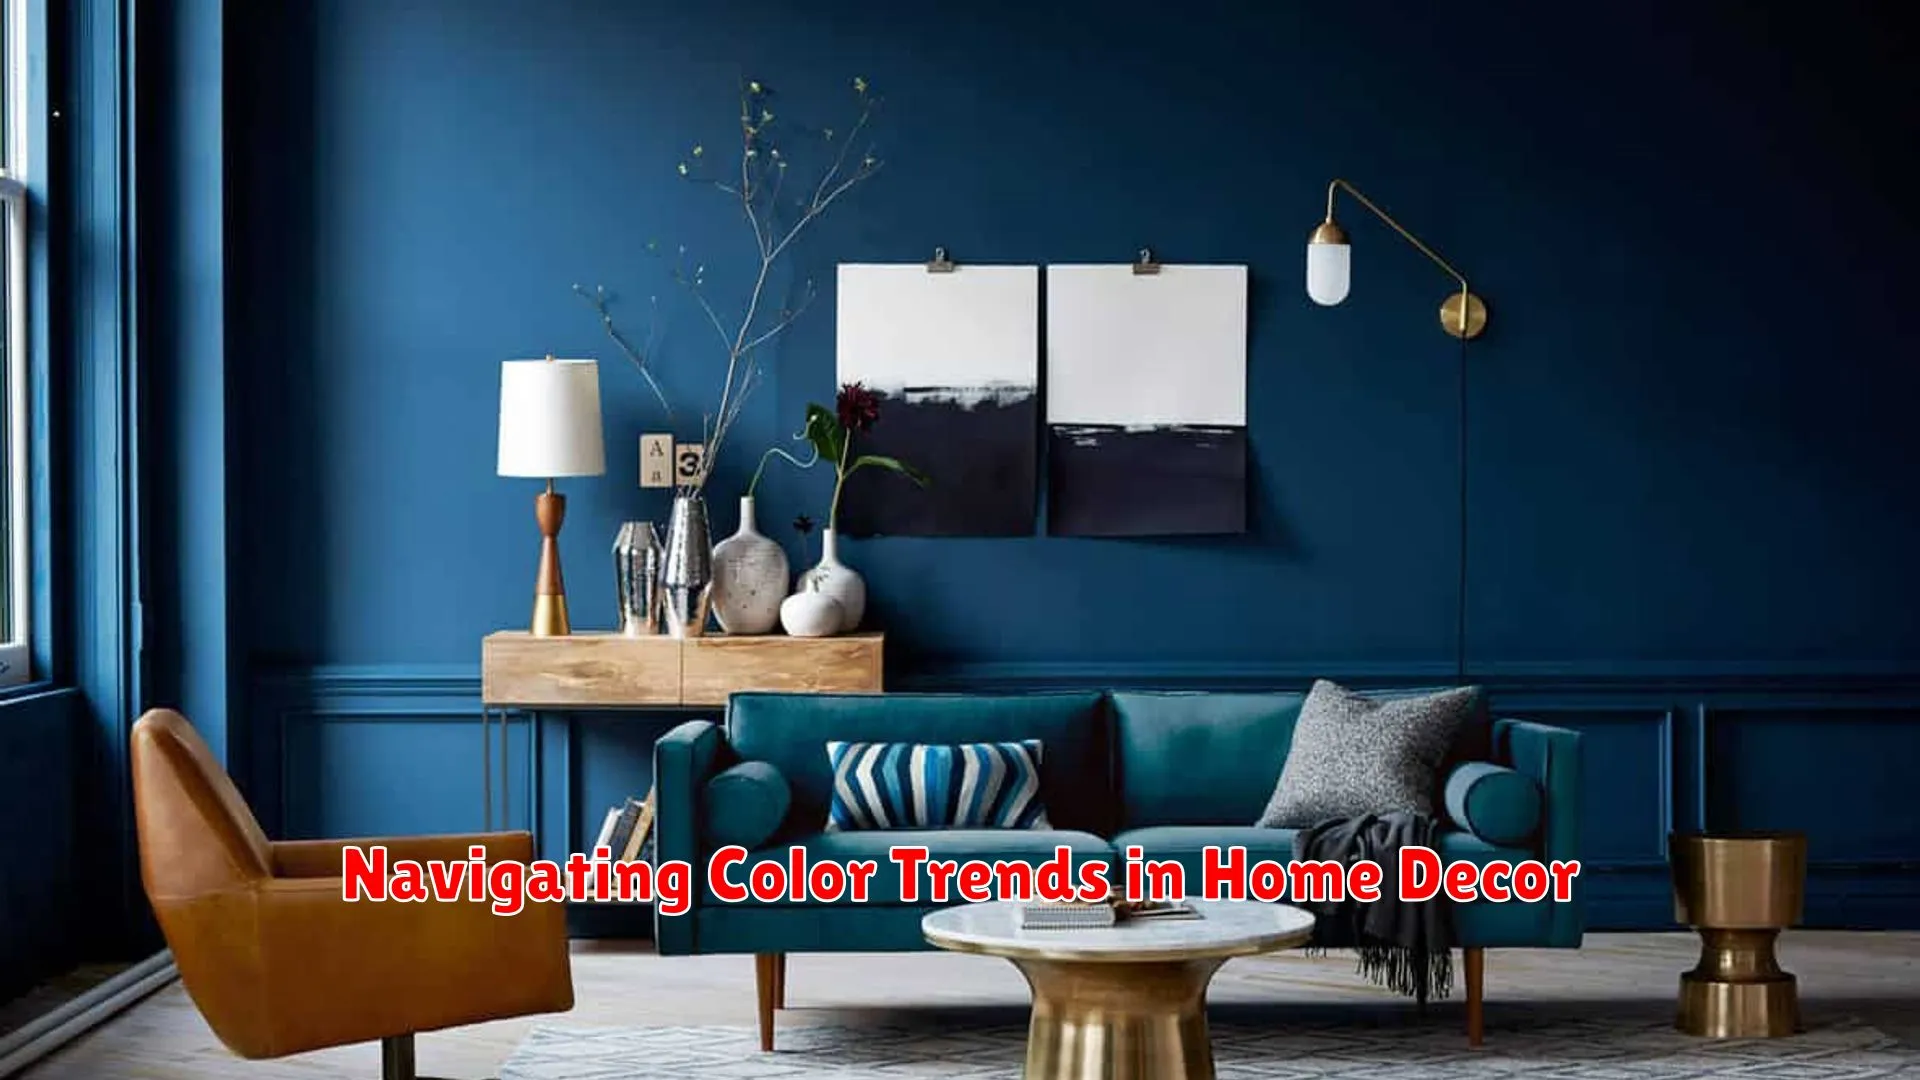 Navigating Color Trends in Home Decor